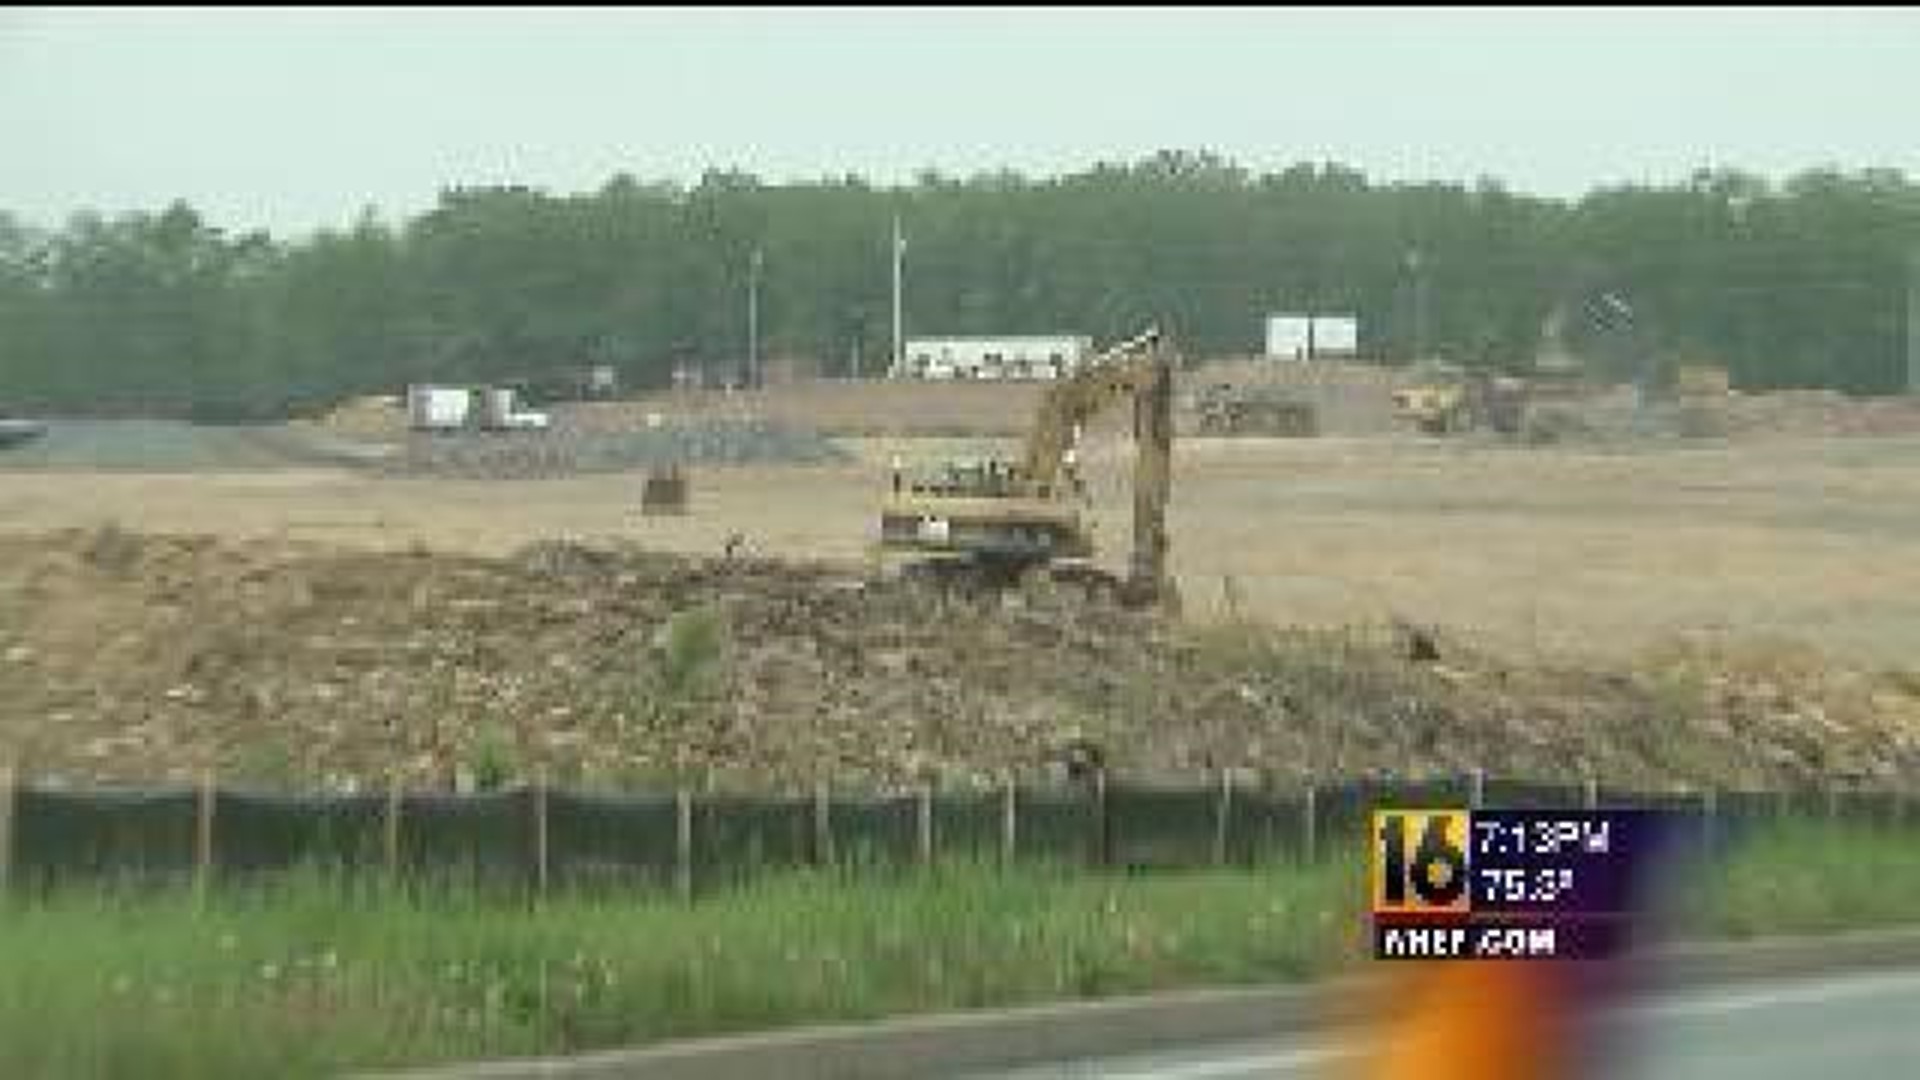 New American Eagle Outfitters Facilty Bringing Jobs